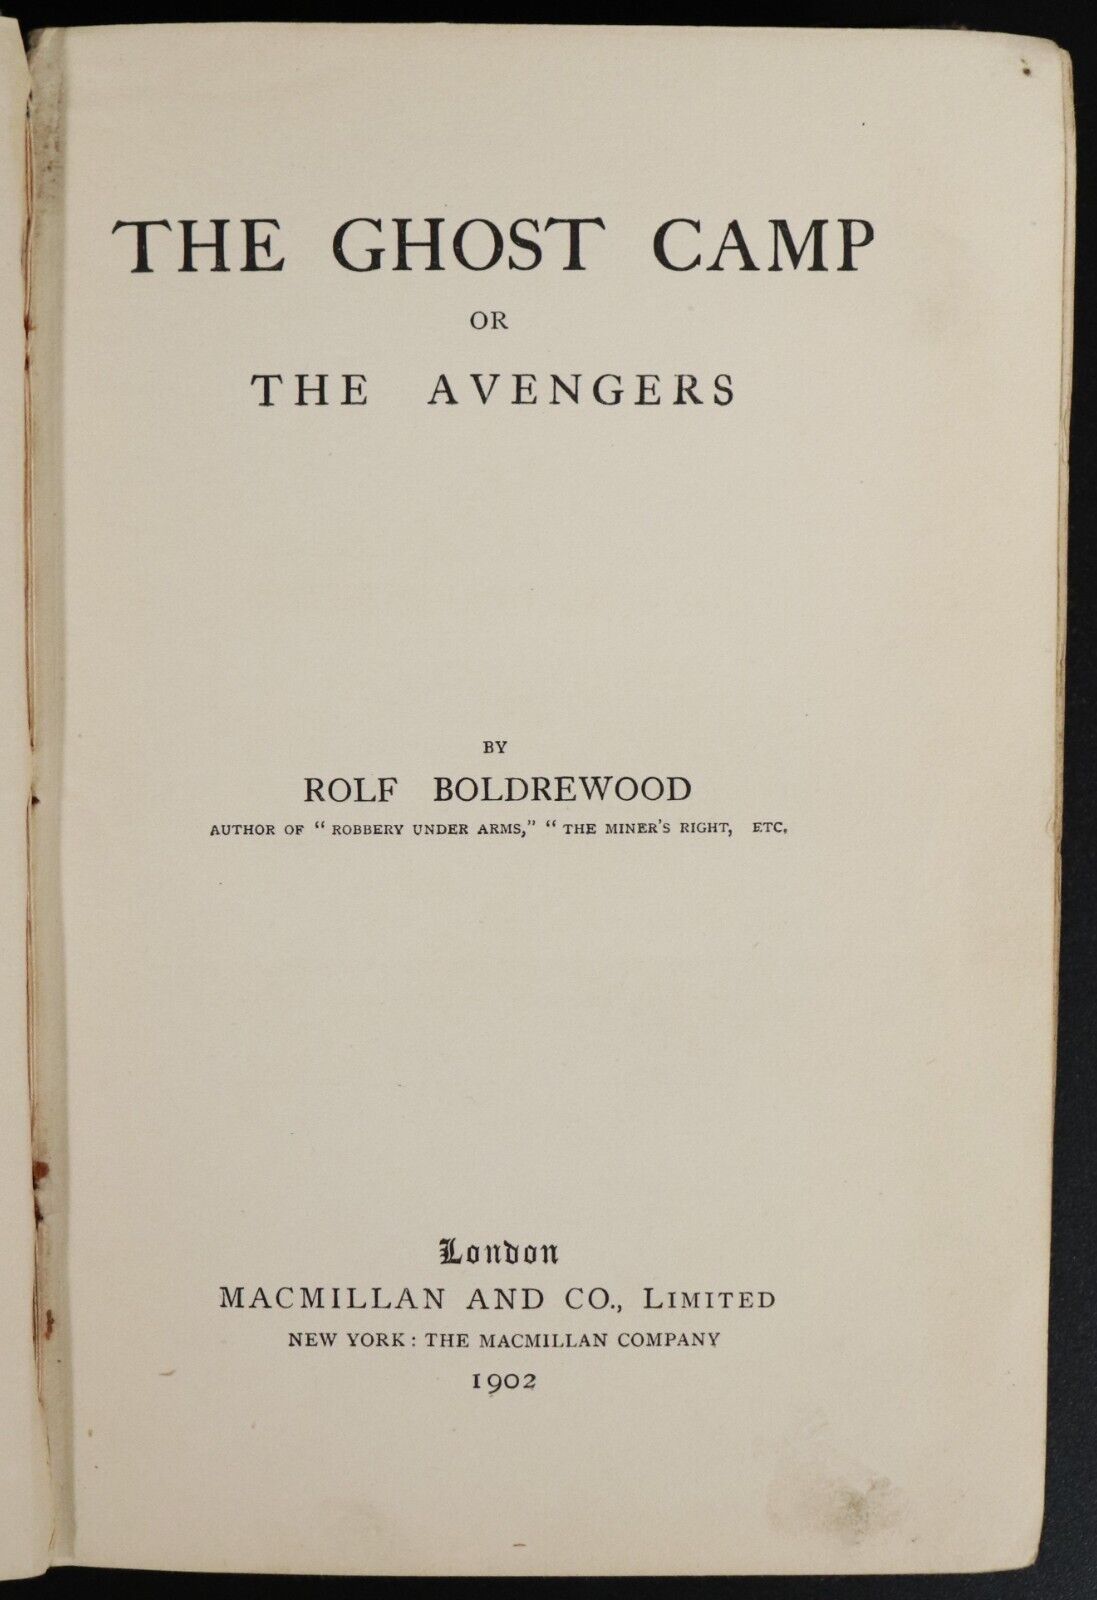 1902 The Ghost Camp by Rolf Boldrewood 1st Ed. Antique Australian Fiction Book - 0